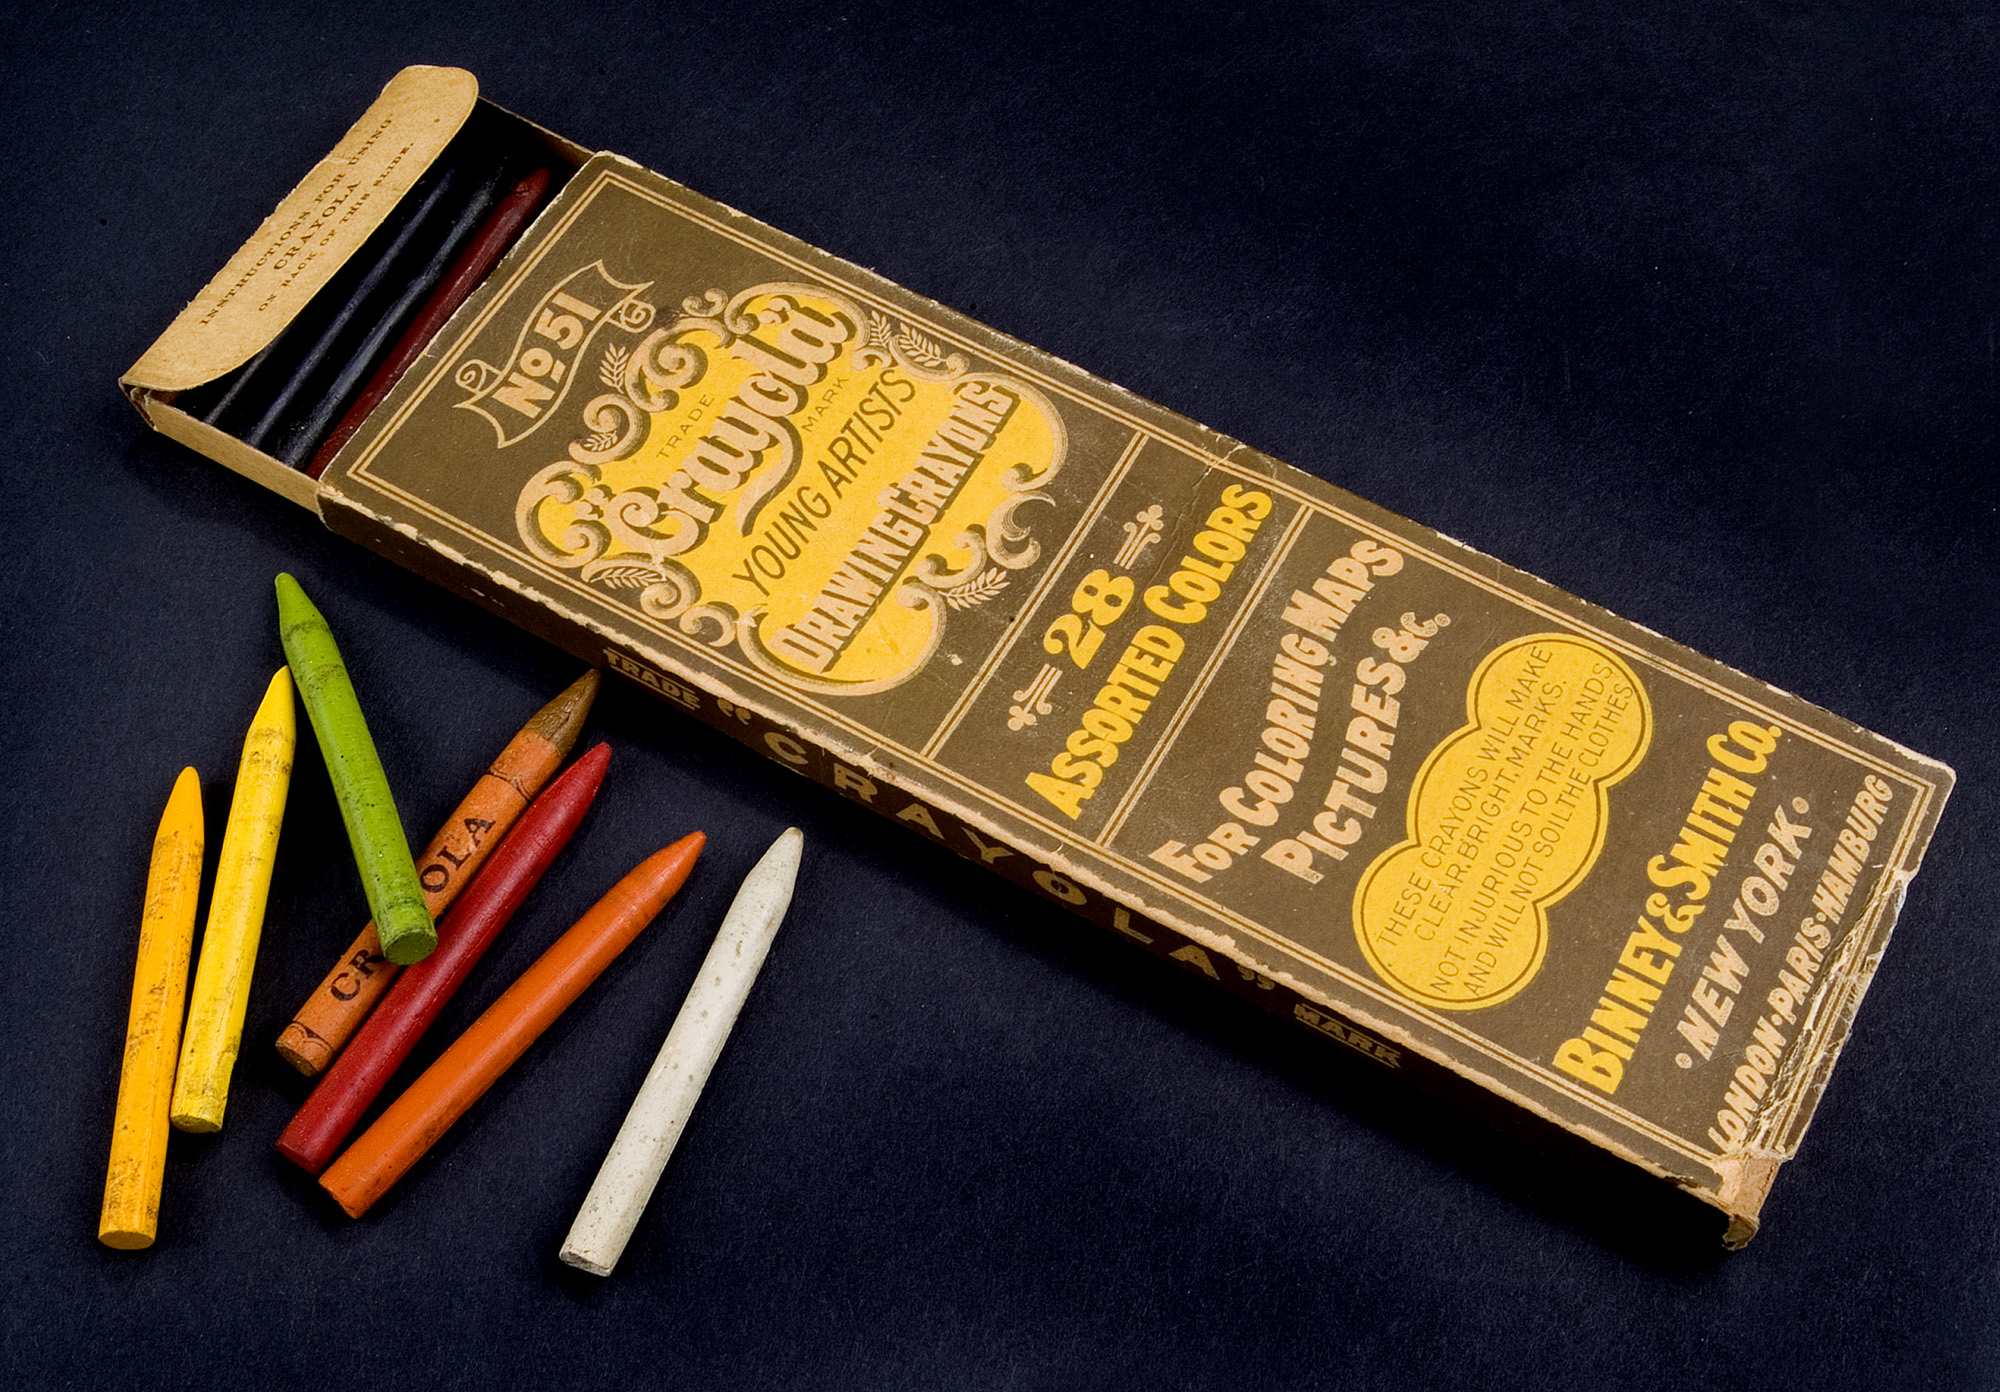 crayola-announces-it-will-retire-dandelion-from-its-iconic-pack-of